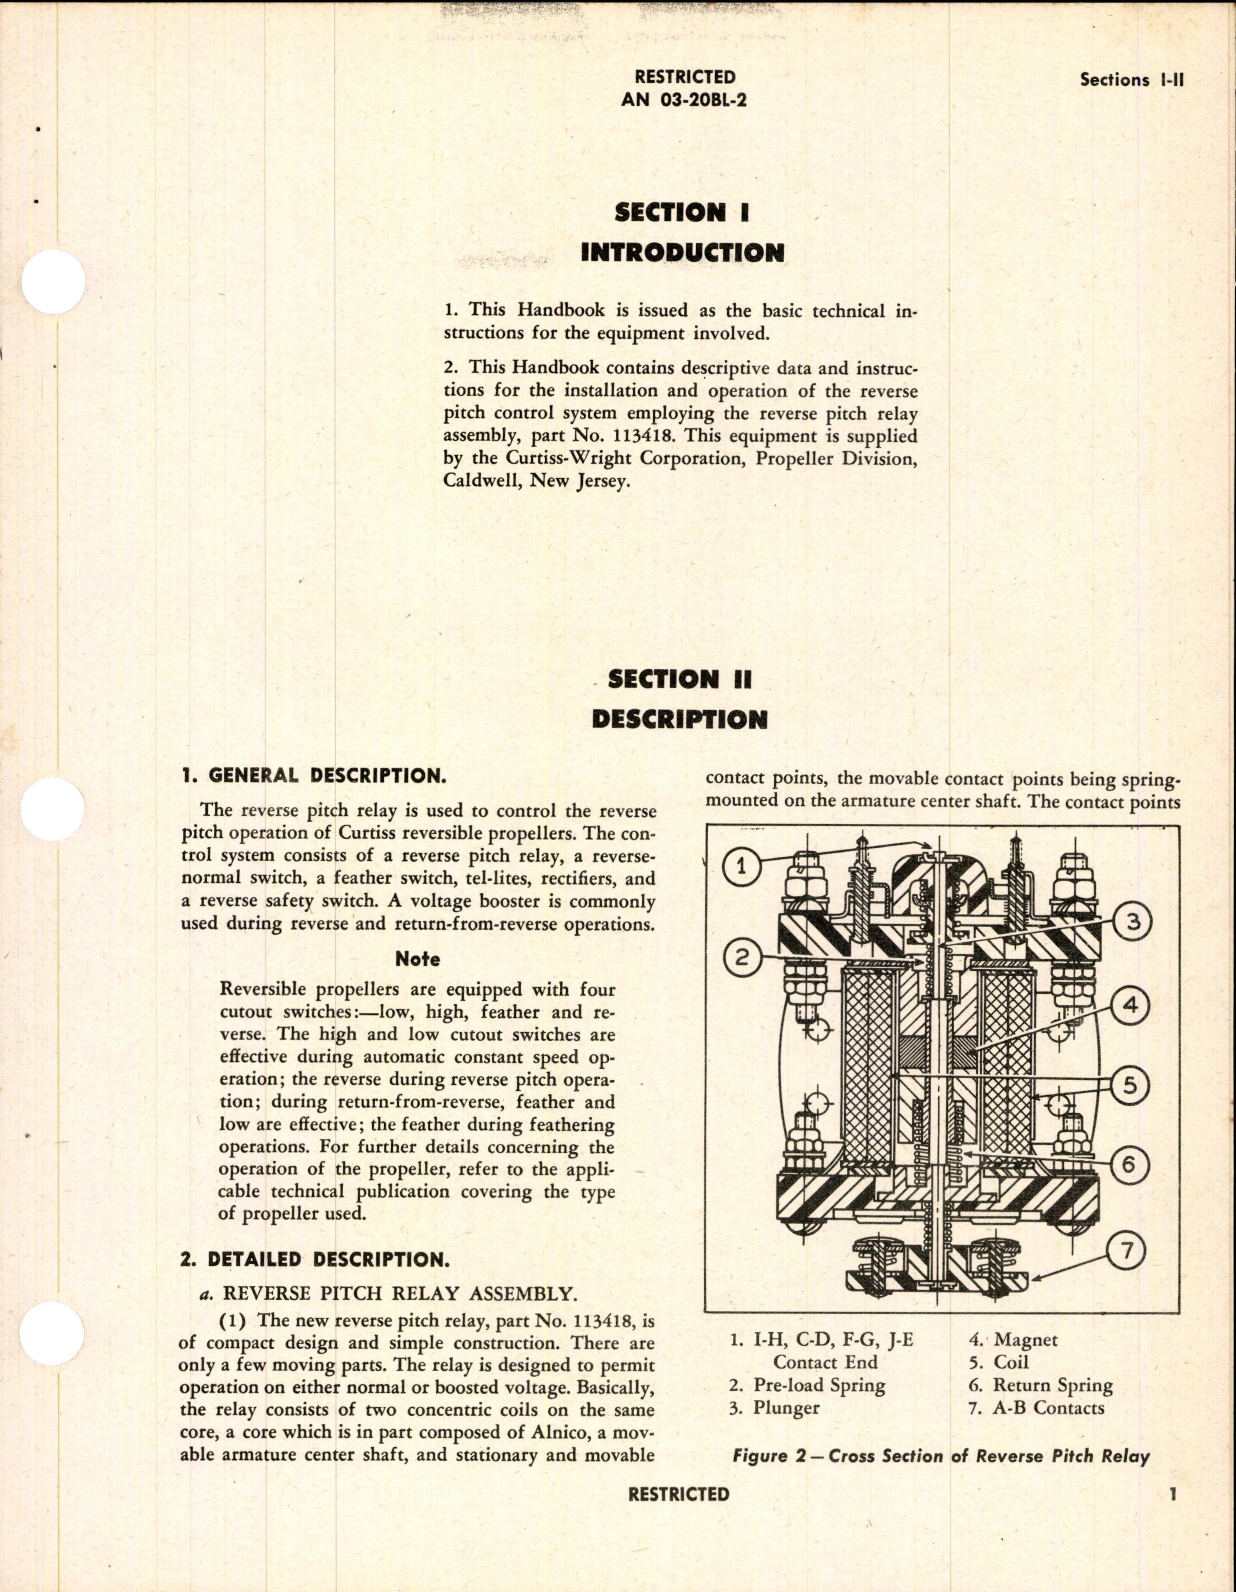 Sample page 5 from AirCorps Library document: Handbook of Instructions with Parts Catalog for Part No 113418 Reverse Pitch Relay